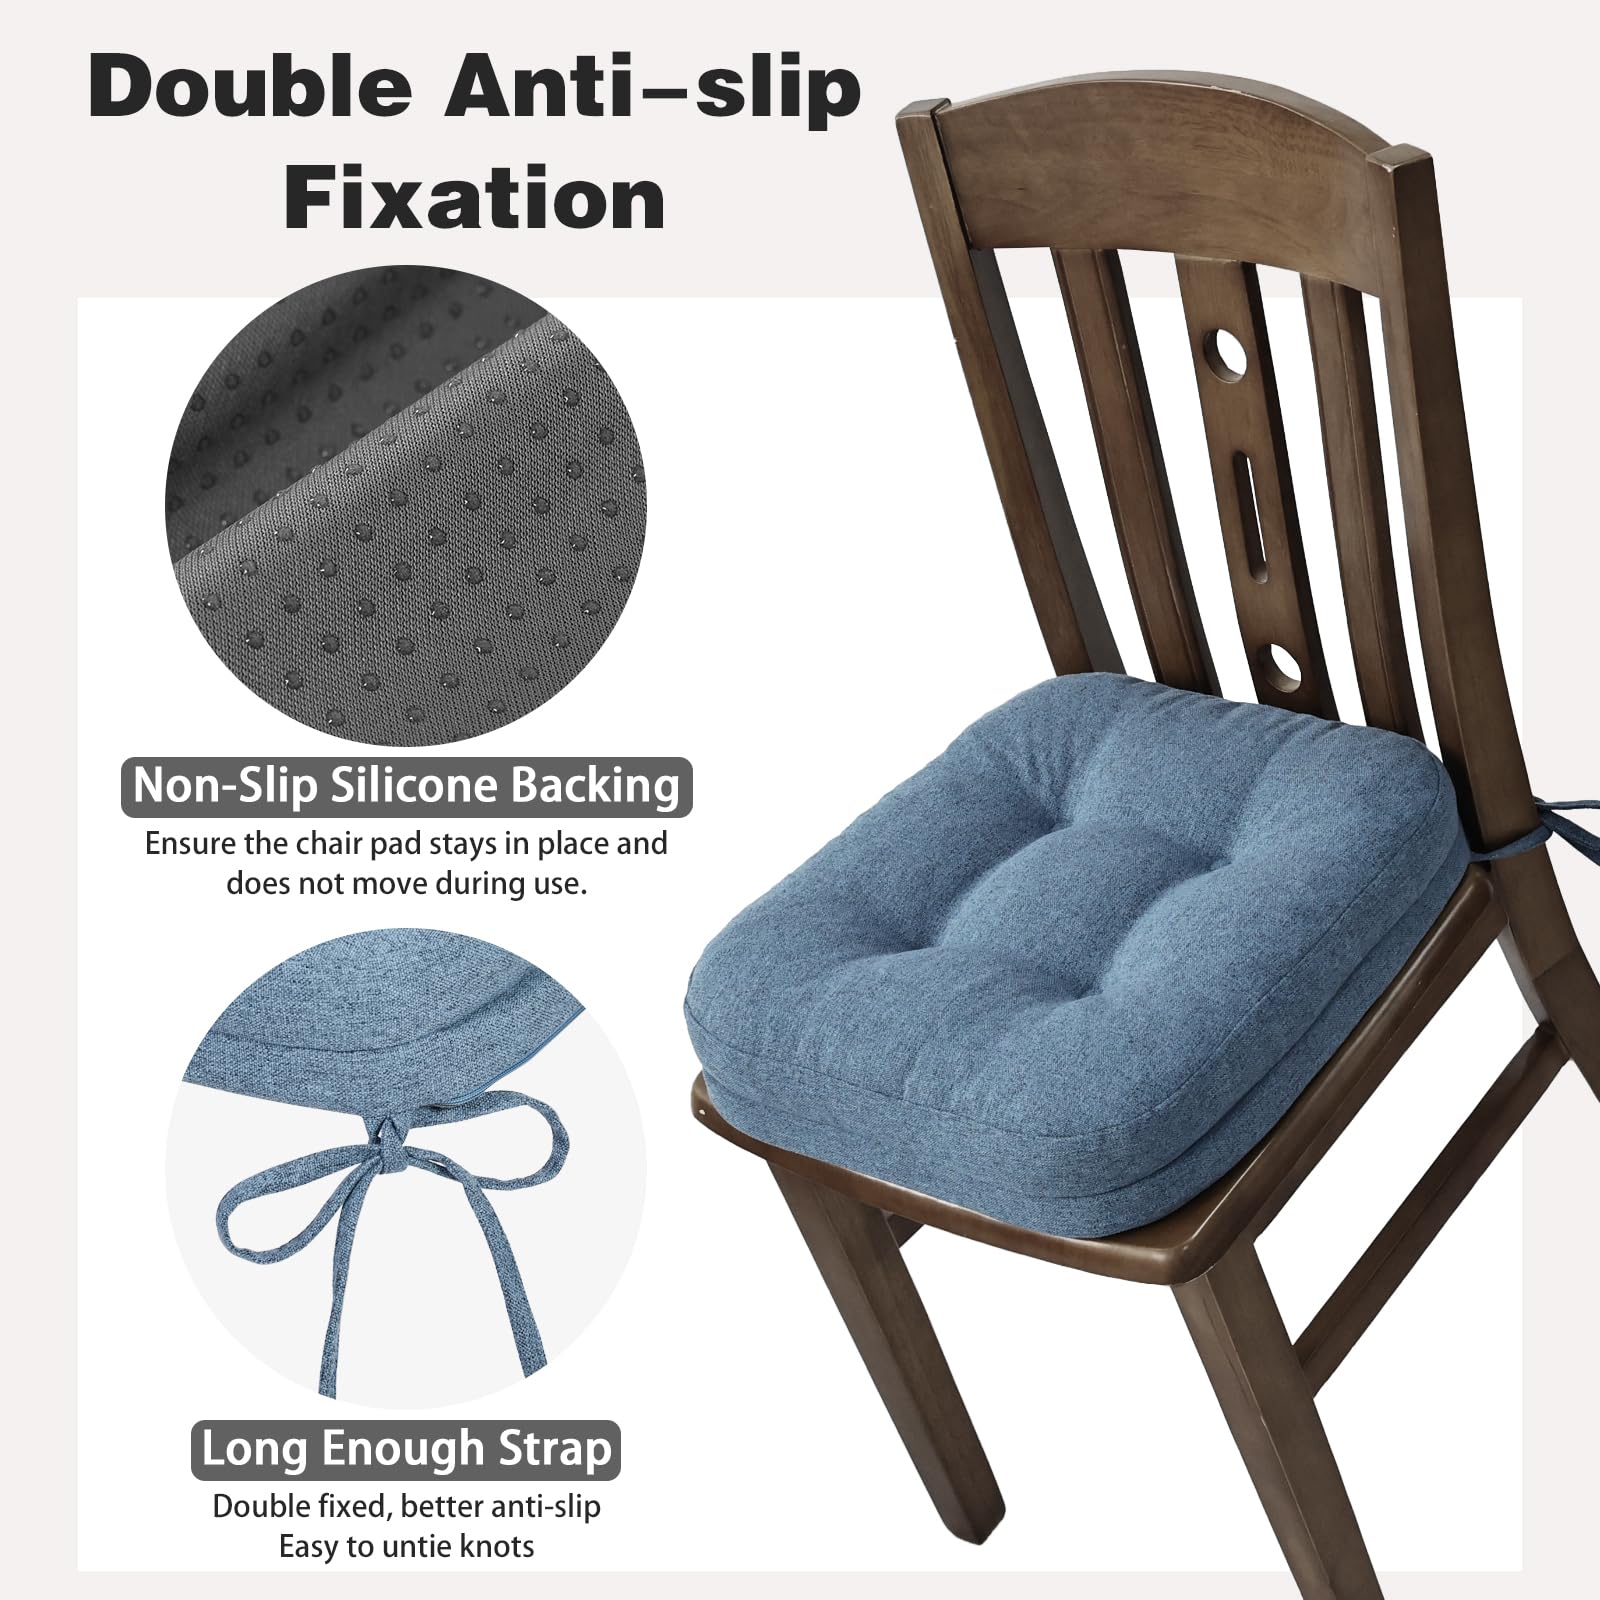 baibu Set of 4 Chair Pads for Dining Chairs, Dual-Layer Patent Design Memory Foam Chair Seat Cushions, Non-Slip Dining Chair Cushions with Ties, 16.5” x 16.5” x 3.5”, Blue